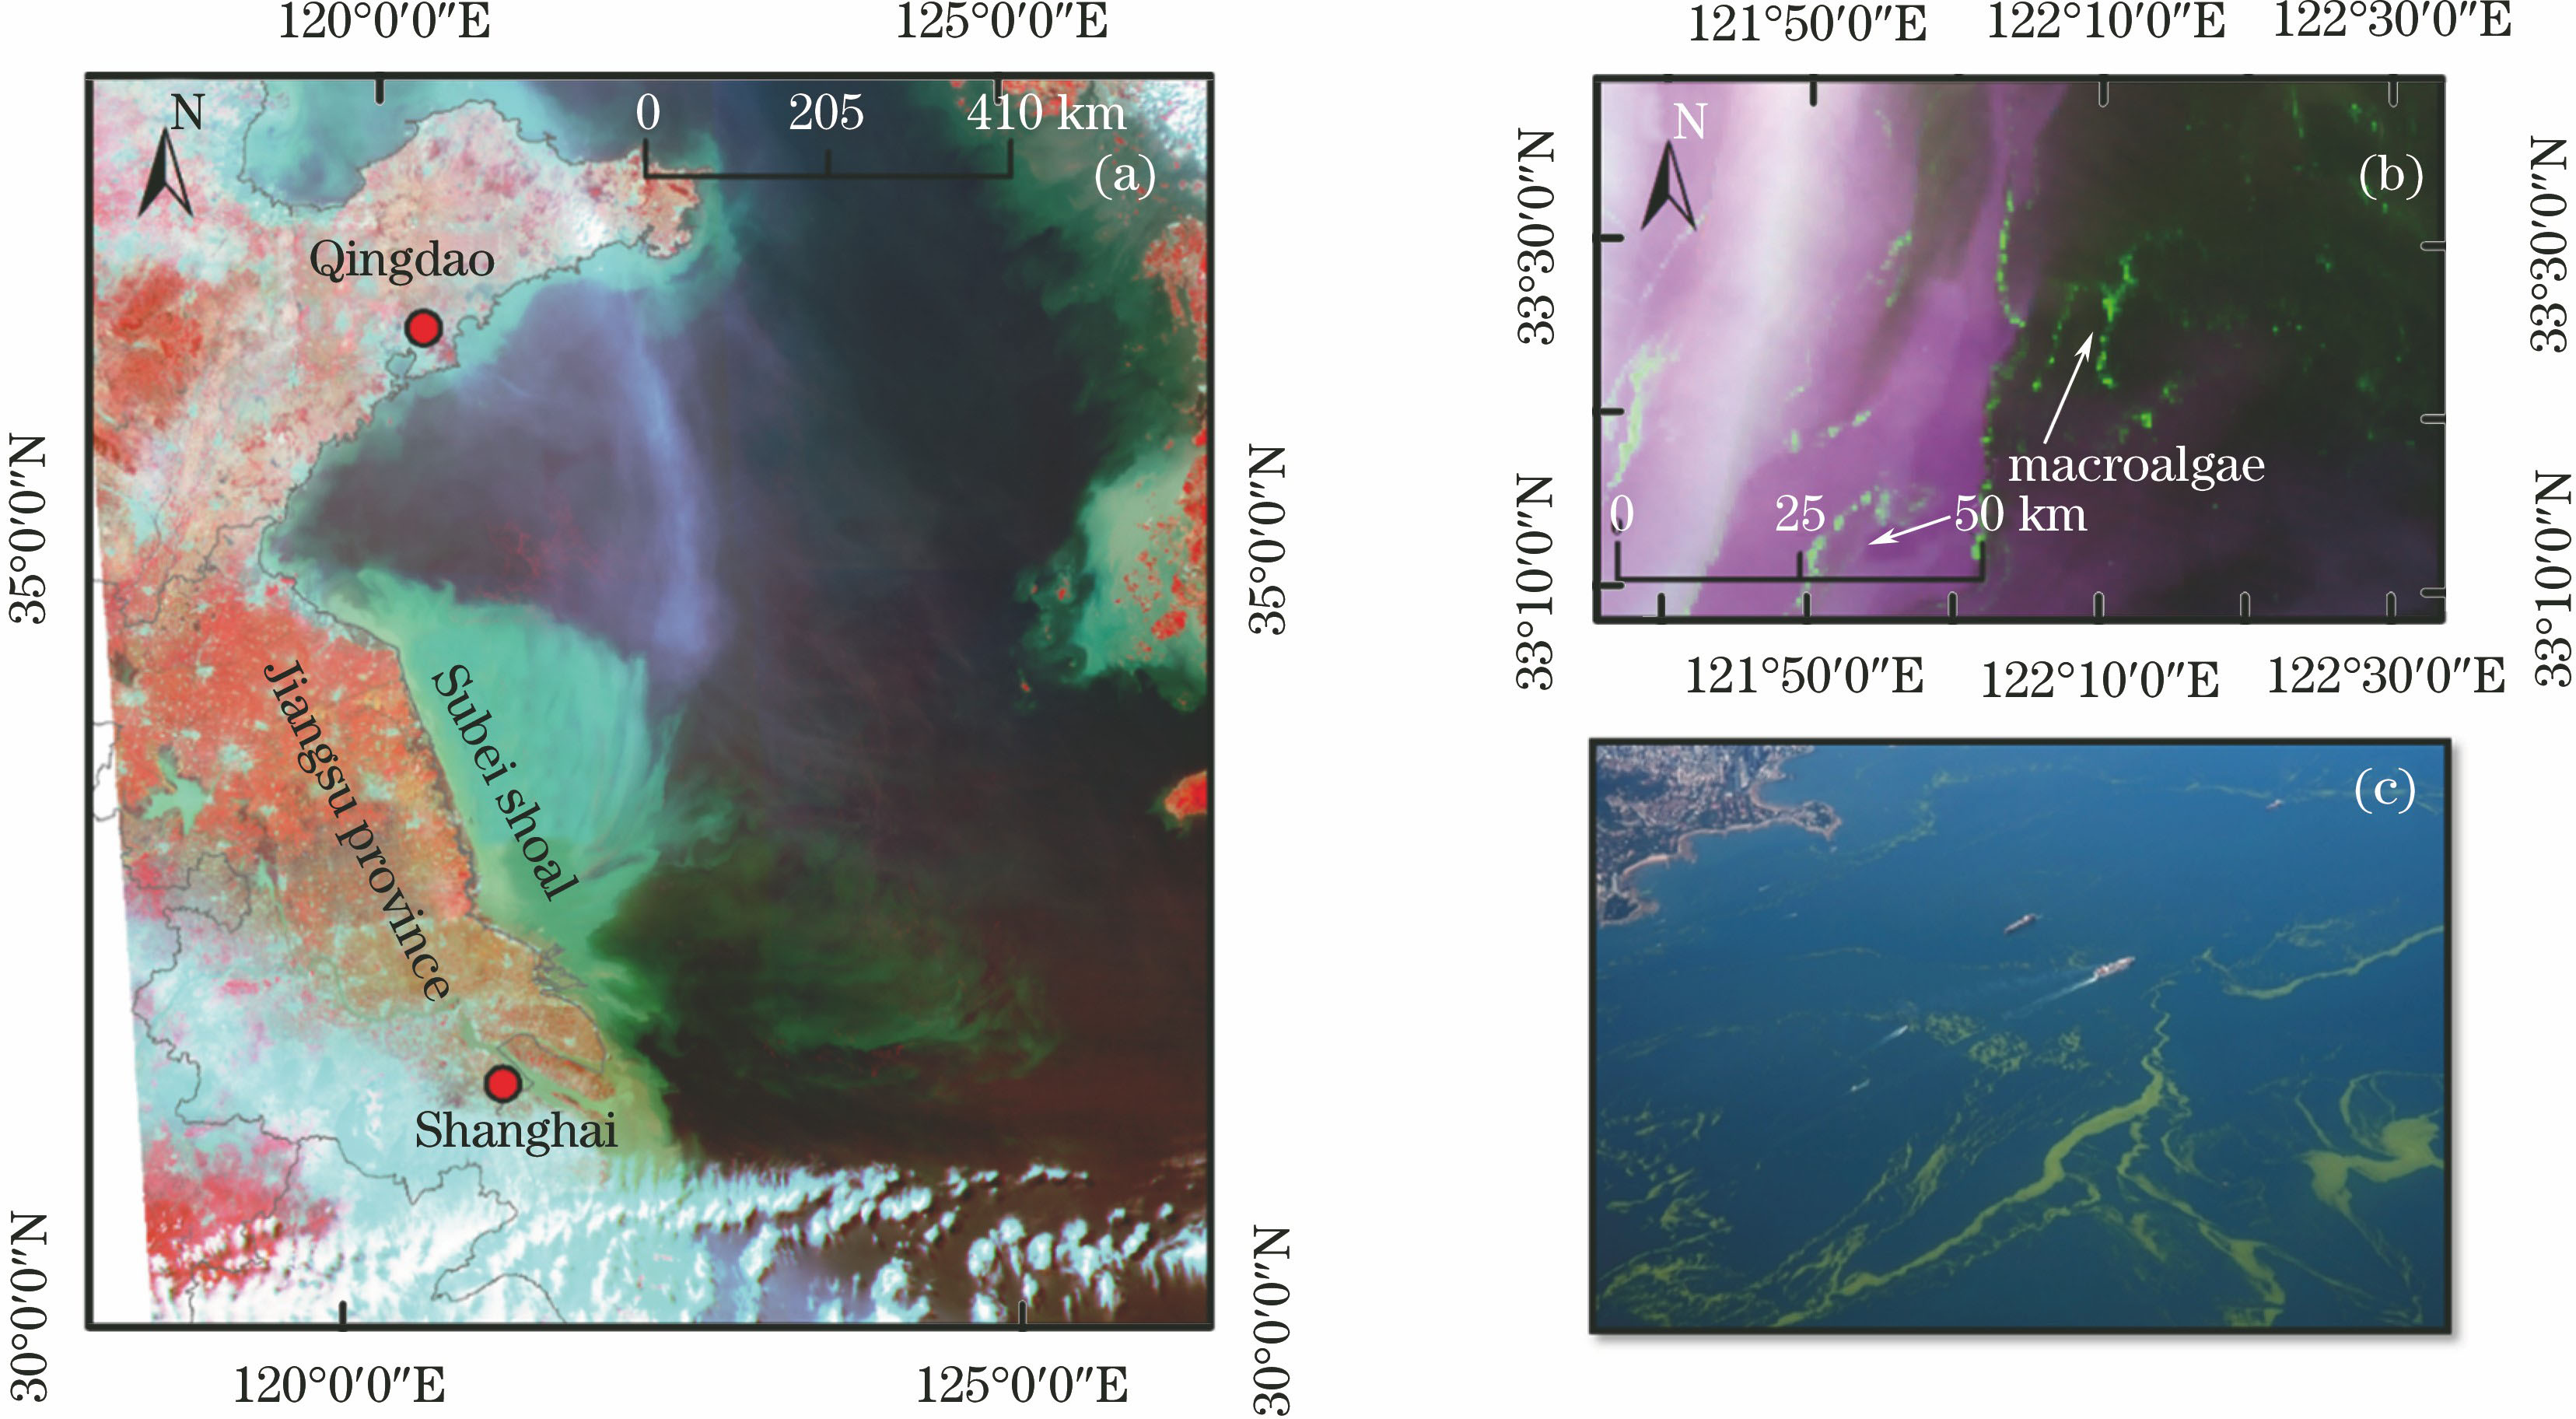 Distribution of Ulva prolifera in Yellow Sea area. (a) Location of Yellow Sea, where RGB image shows pseudo-color composite image of GOCI acquired on 26 May, 2017; (b) true-color composite image of GOCI along coast of Qingdao acquired on 26 May, 2017; (c) aerial photo of Qingdao coast attacked by Ulva prolifera taken on 10 July, 2016